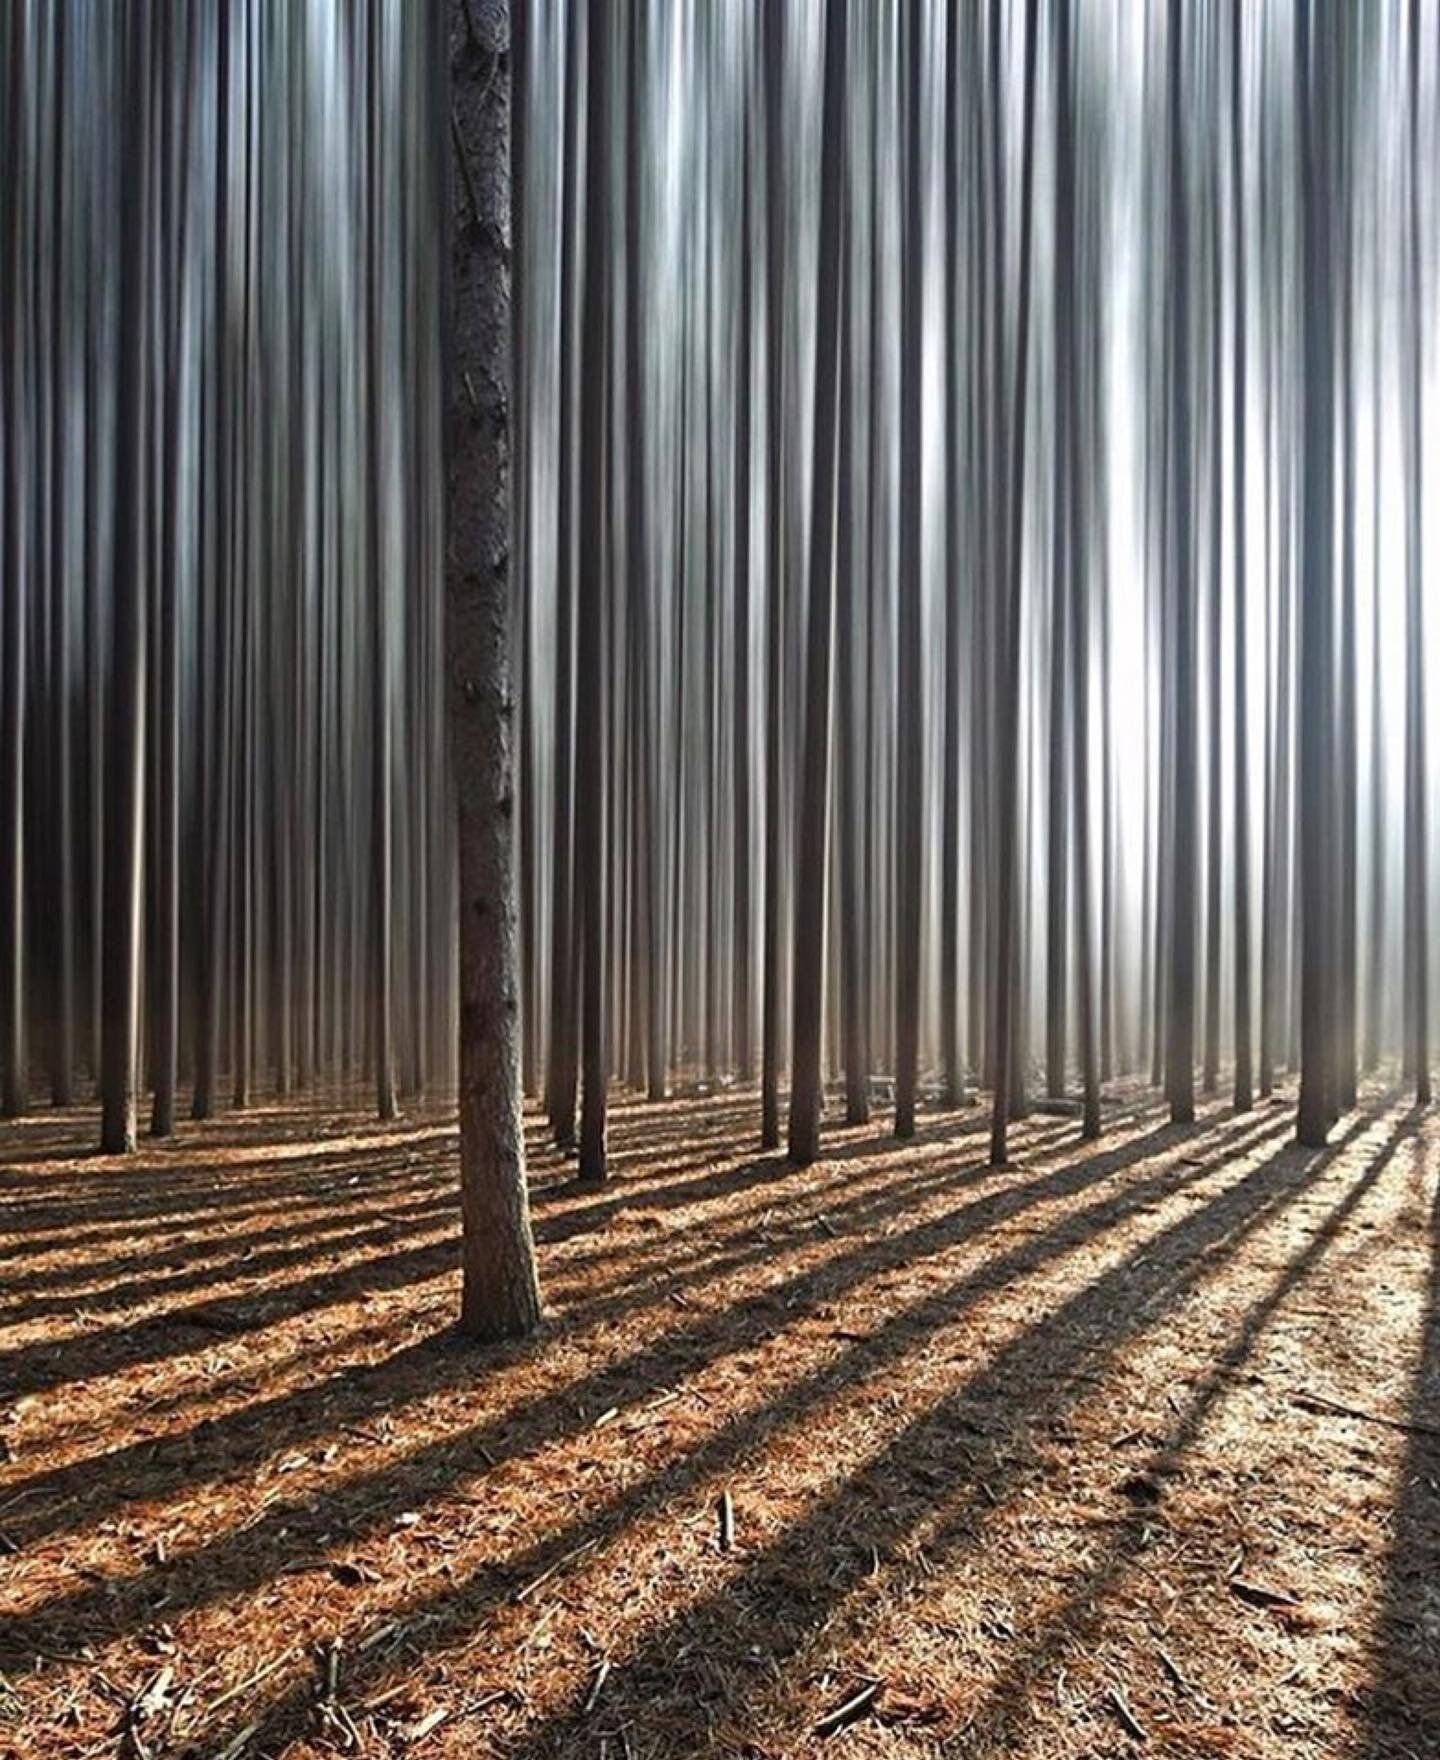 MAKE SPACE FOR___ forest bathing.

&ldquo;The art of forest bathing is the art of connecting with nature through our senses.&rdquo; - Dr. Qing Li

🎼Listening 🎧&rdquo;My Friend the Forest&rdquo; 🎵 Nils Frahm
 
For a moment I thought we entered the 